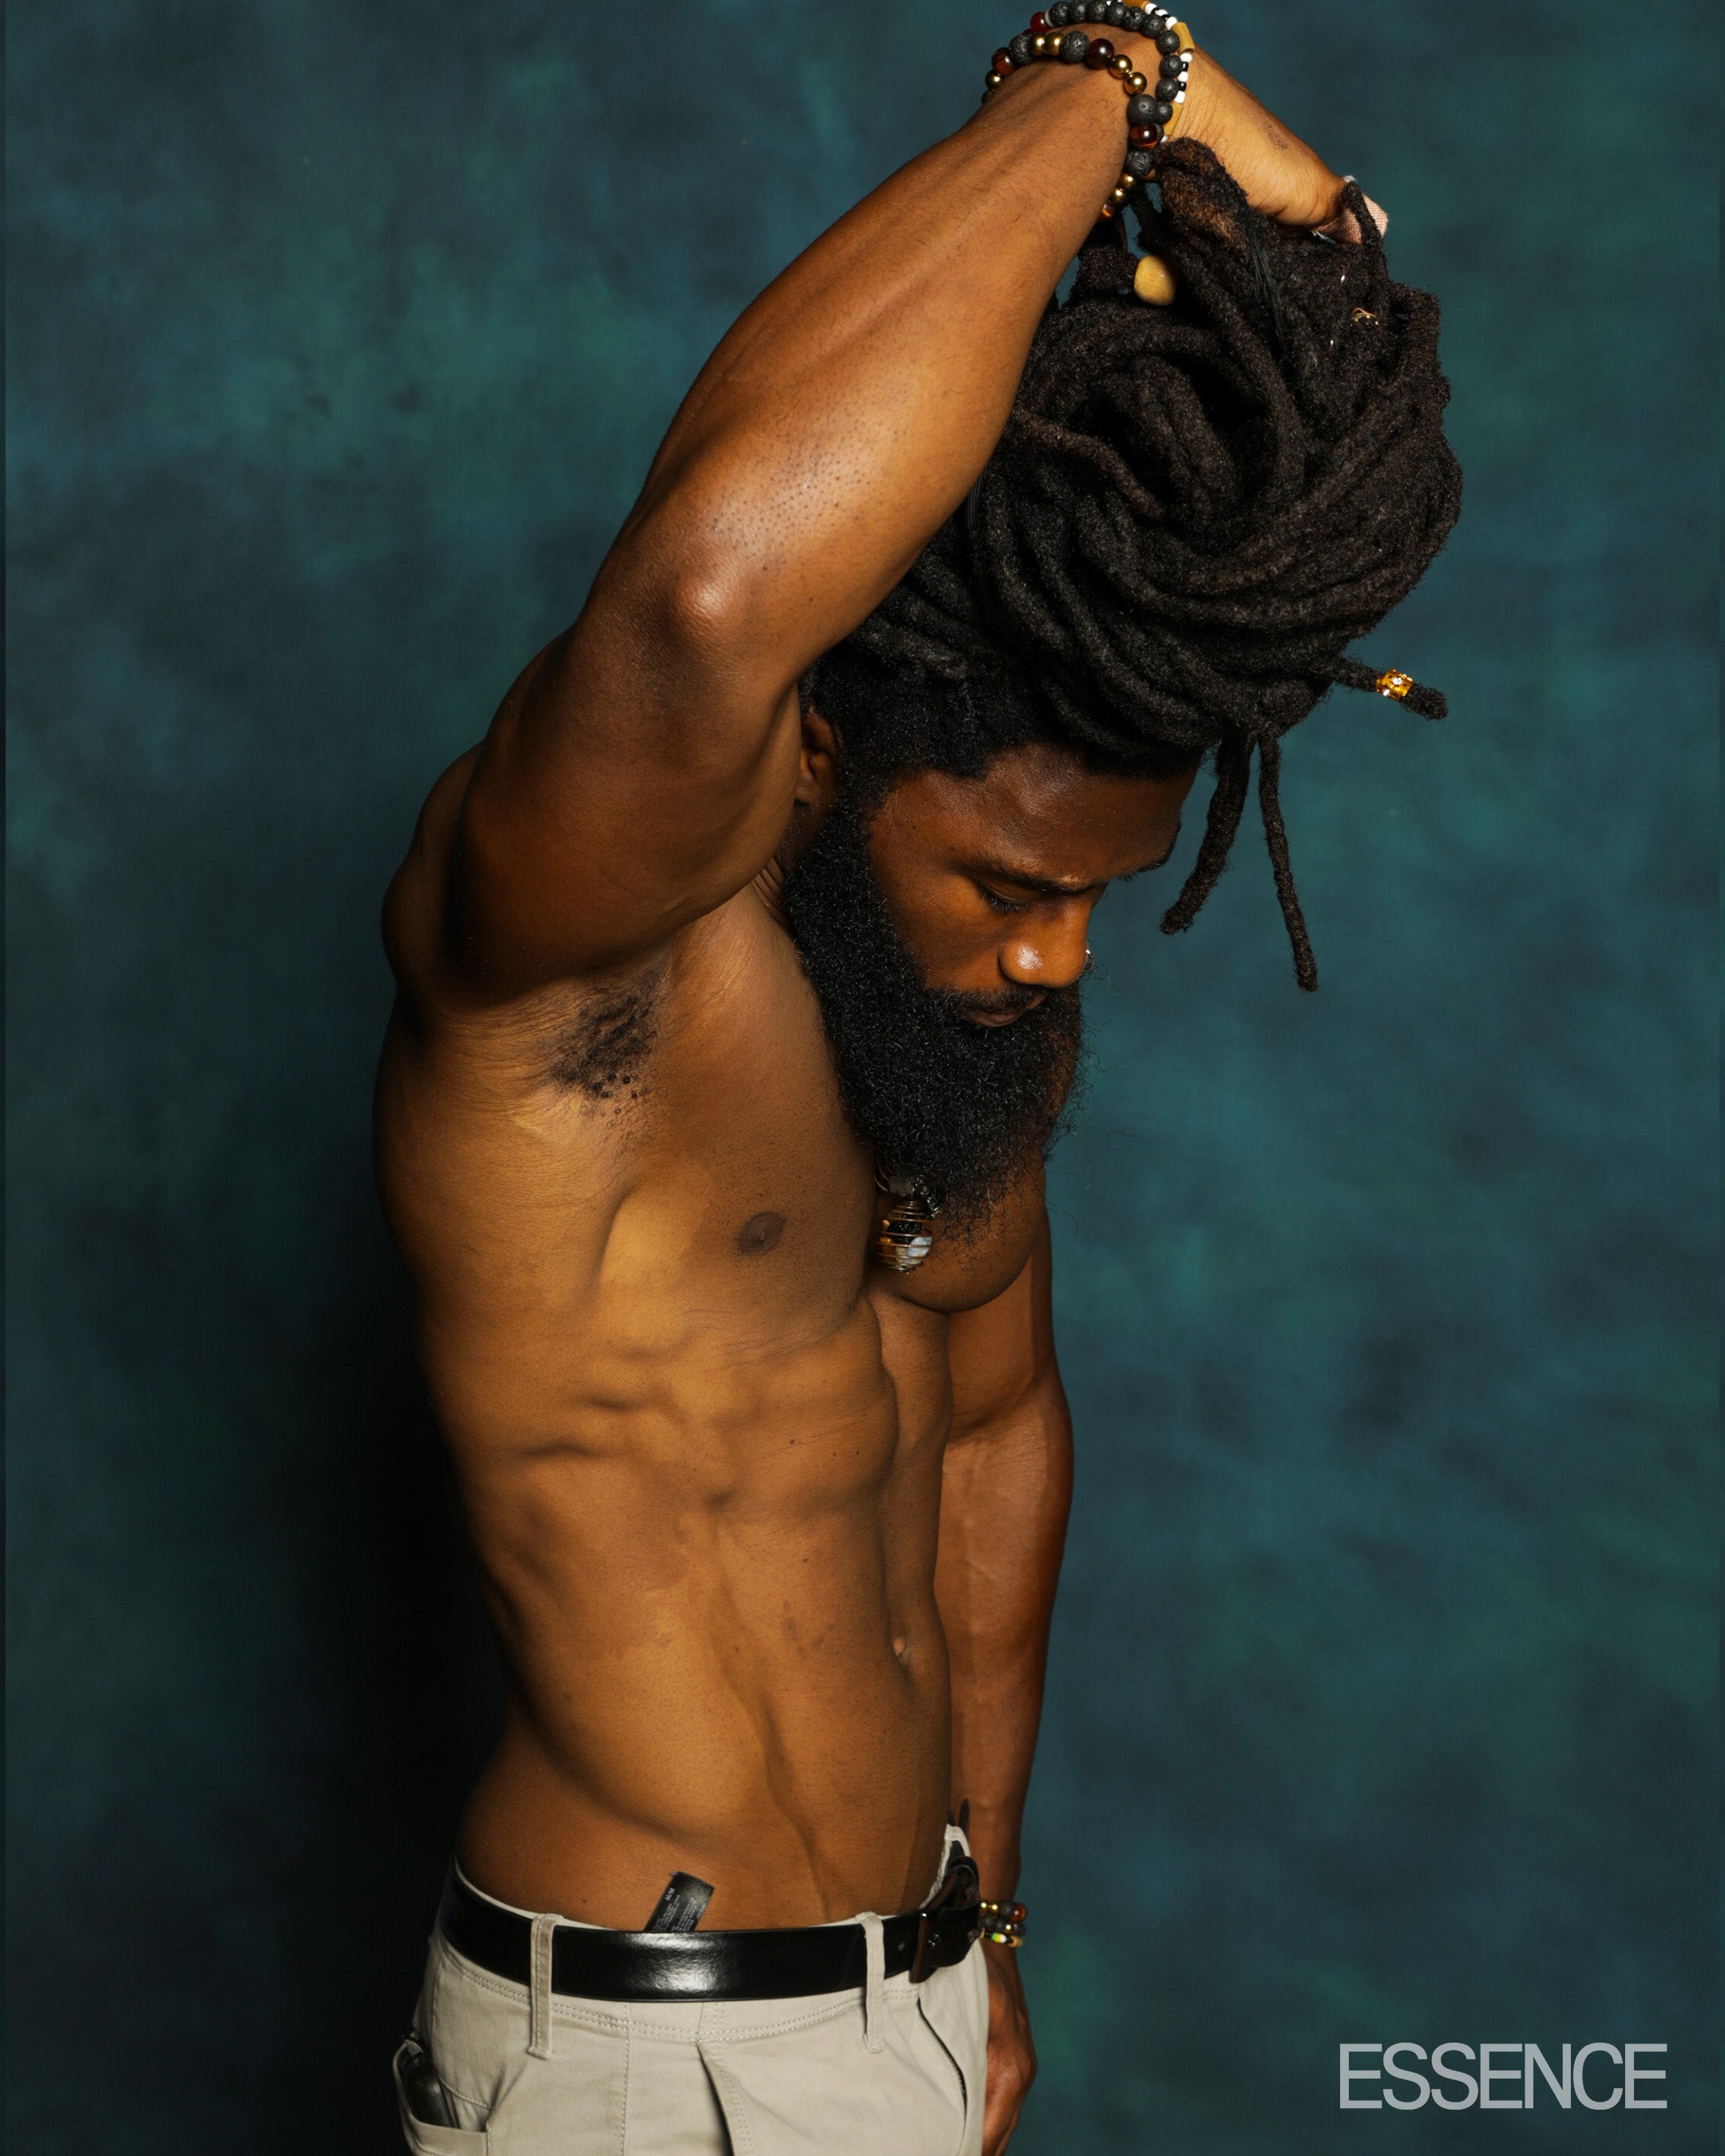 Shirtless Men Plus ESSENCE Festival Equaled Pure Heaven For The Ladies